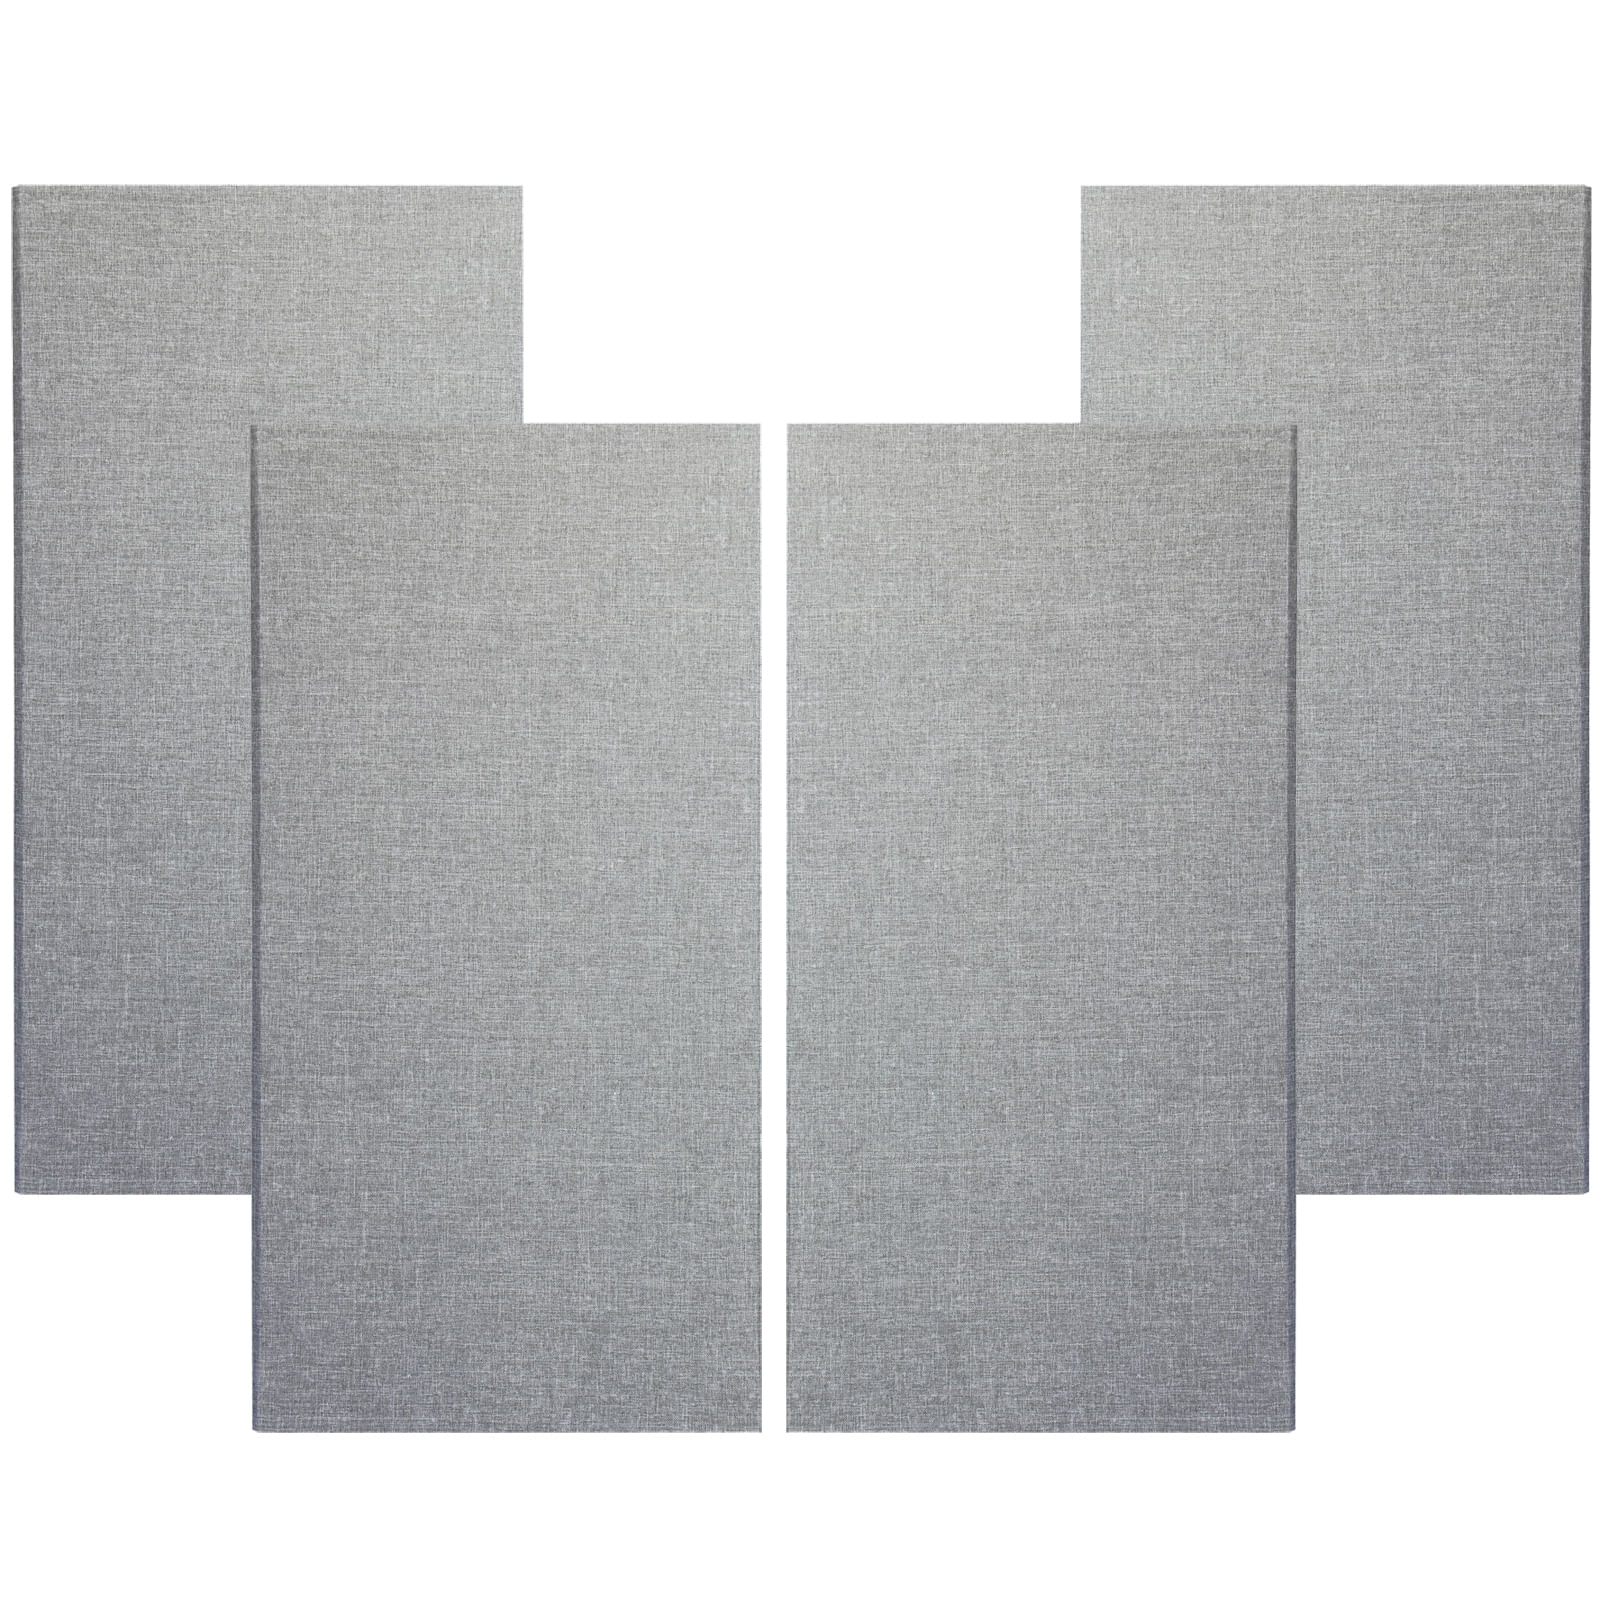 View larger image of Primacoustic Broadway Broadband Absorbers - 3